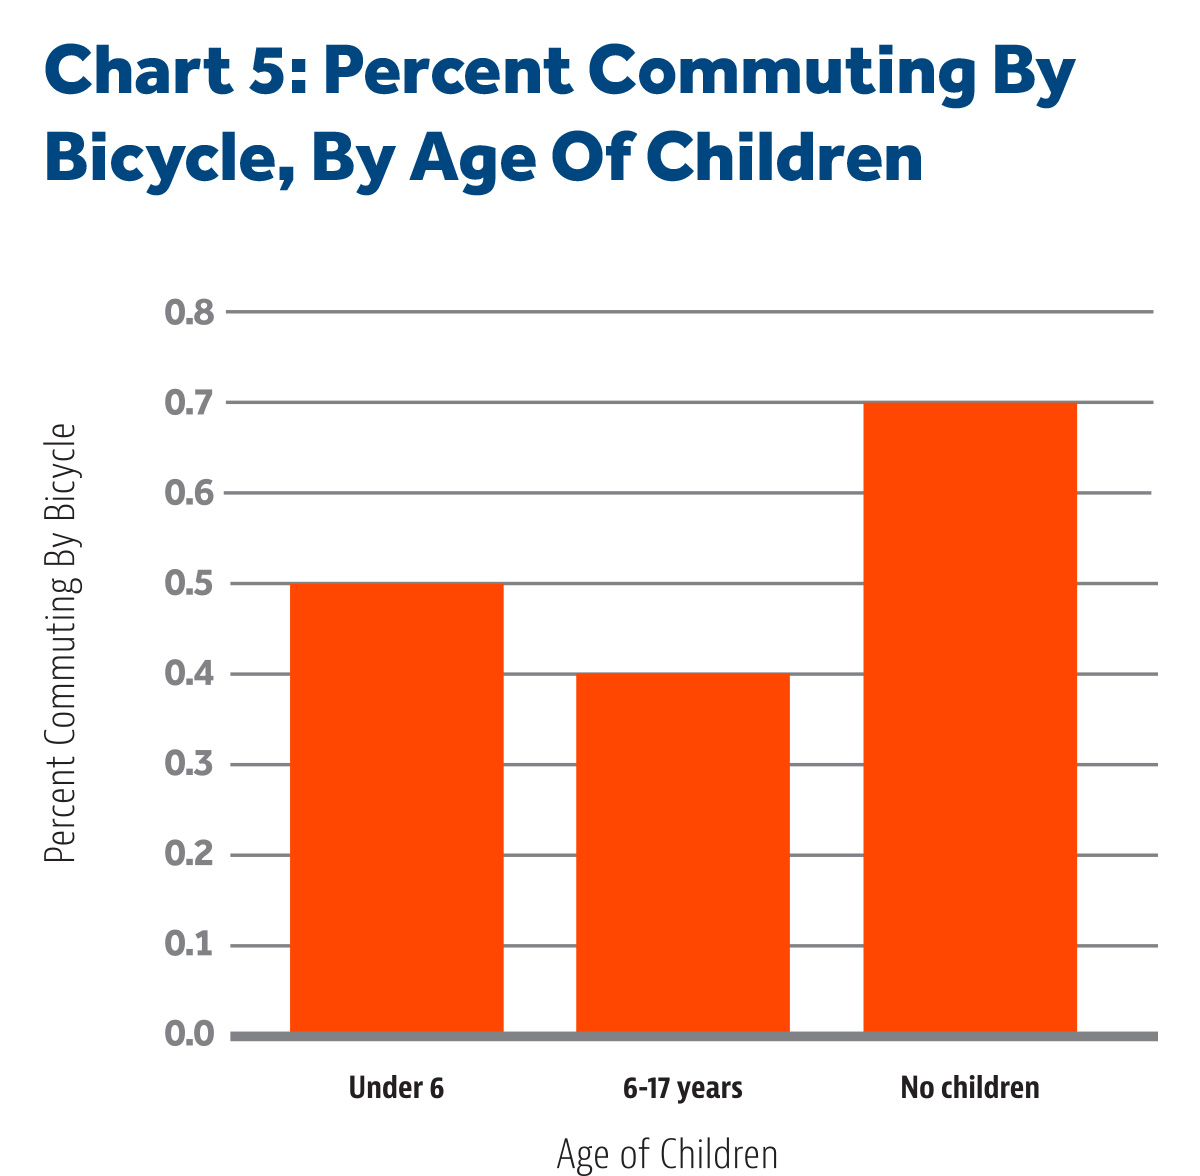 Percent Commuting By Bicycle, By Age Of Children